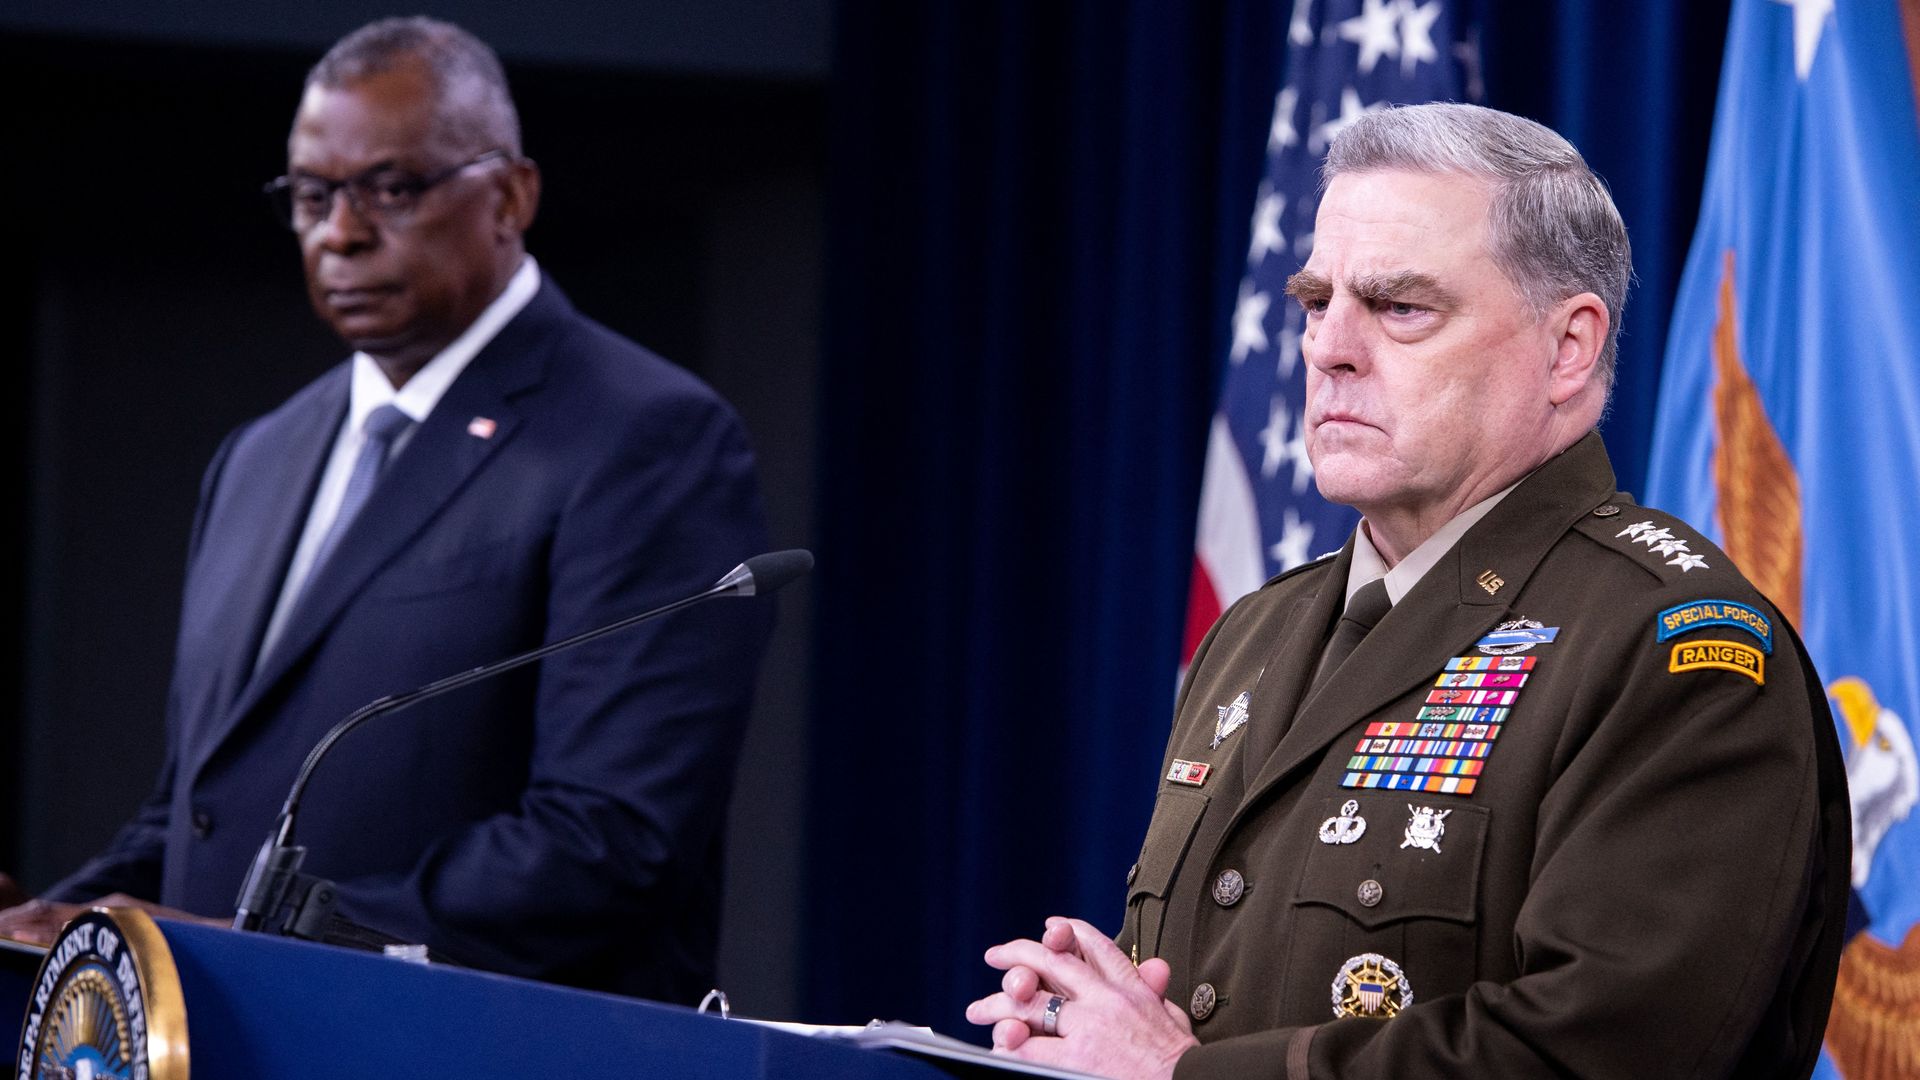 Secretary of Defense Lloyd Austin III and Army General Mark Milley (R), Chairman of the Joint Chiefs of Staff